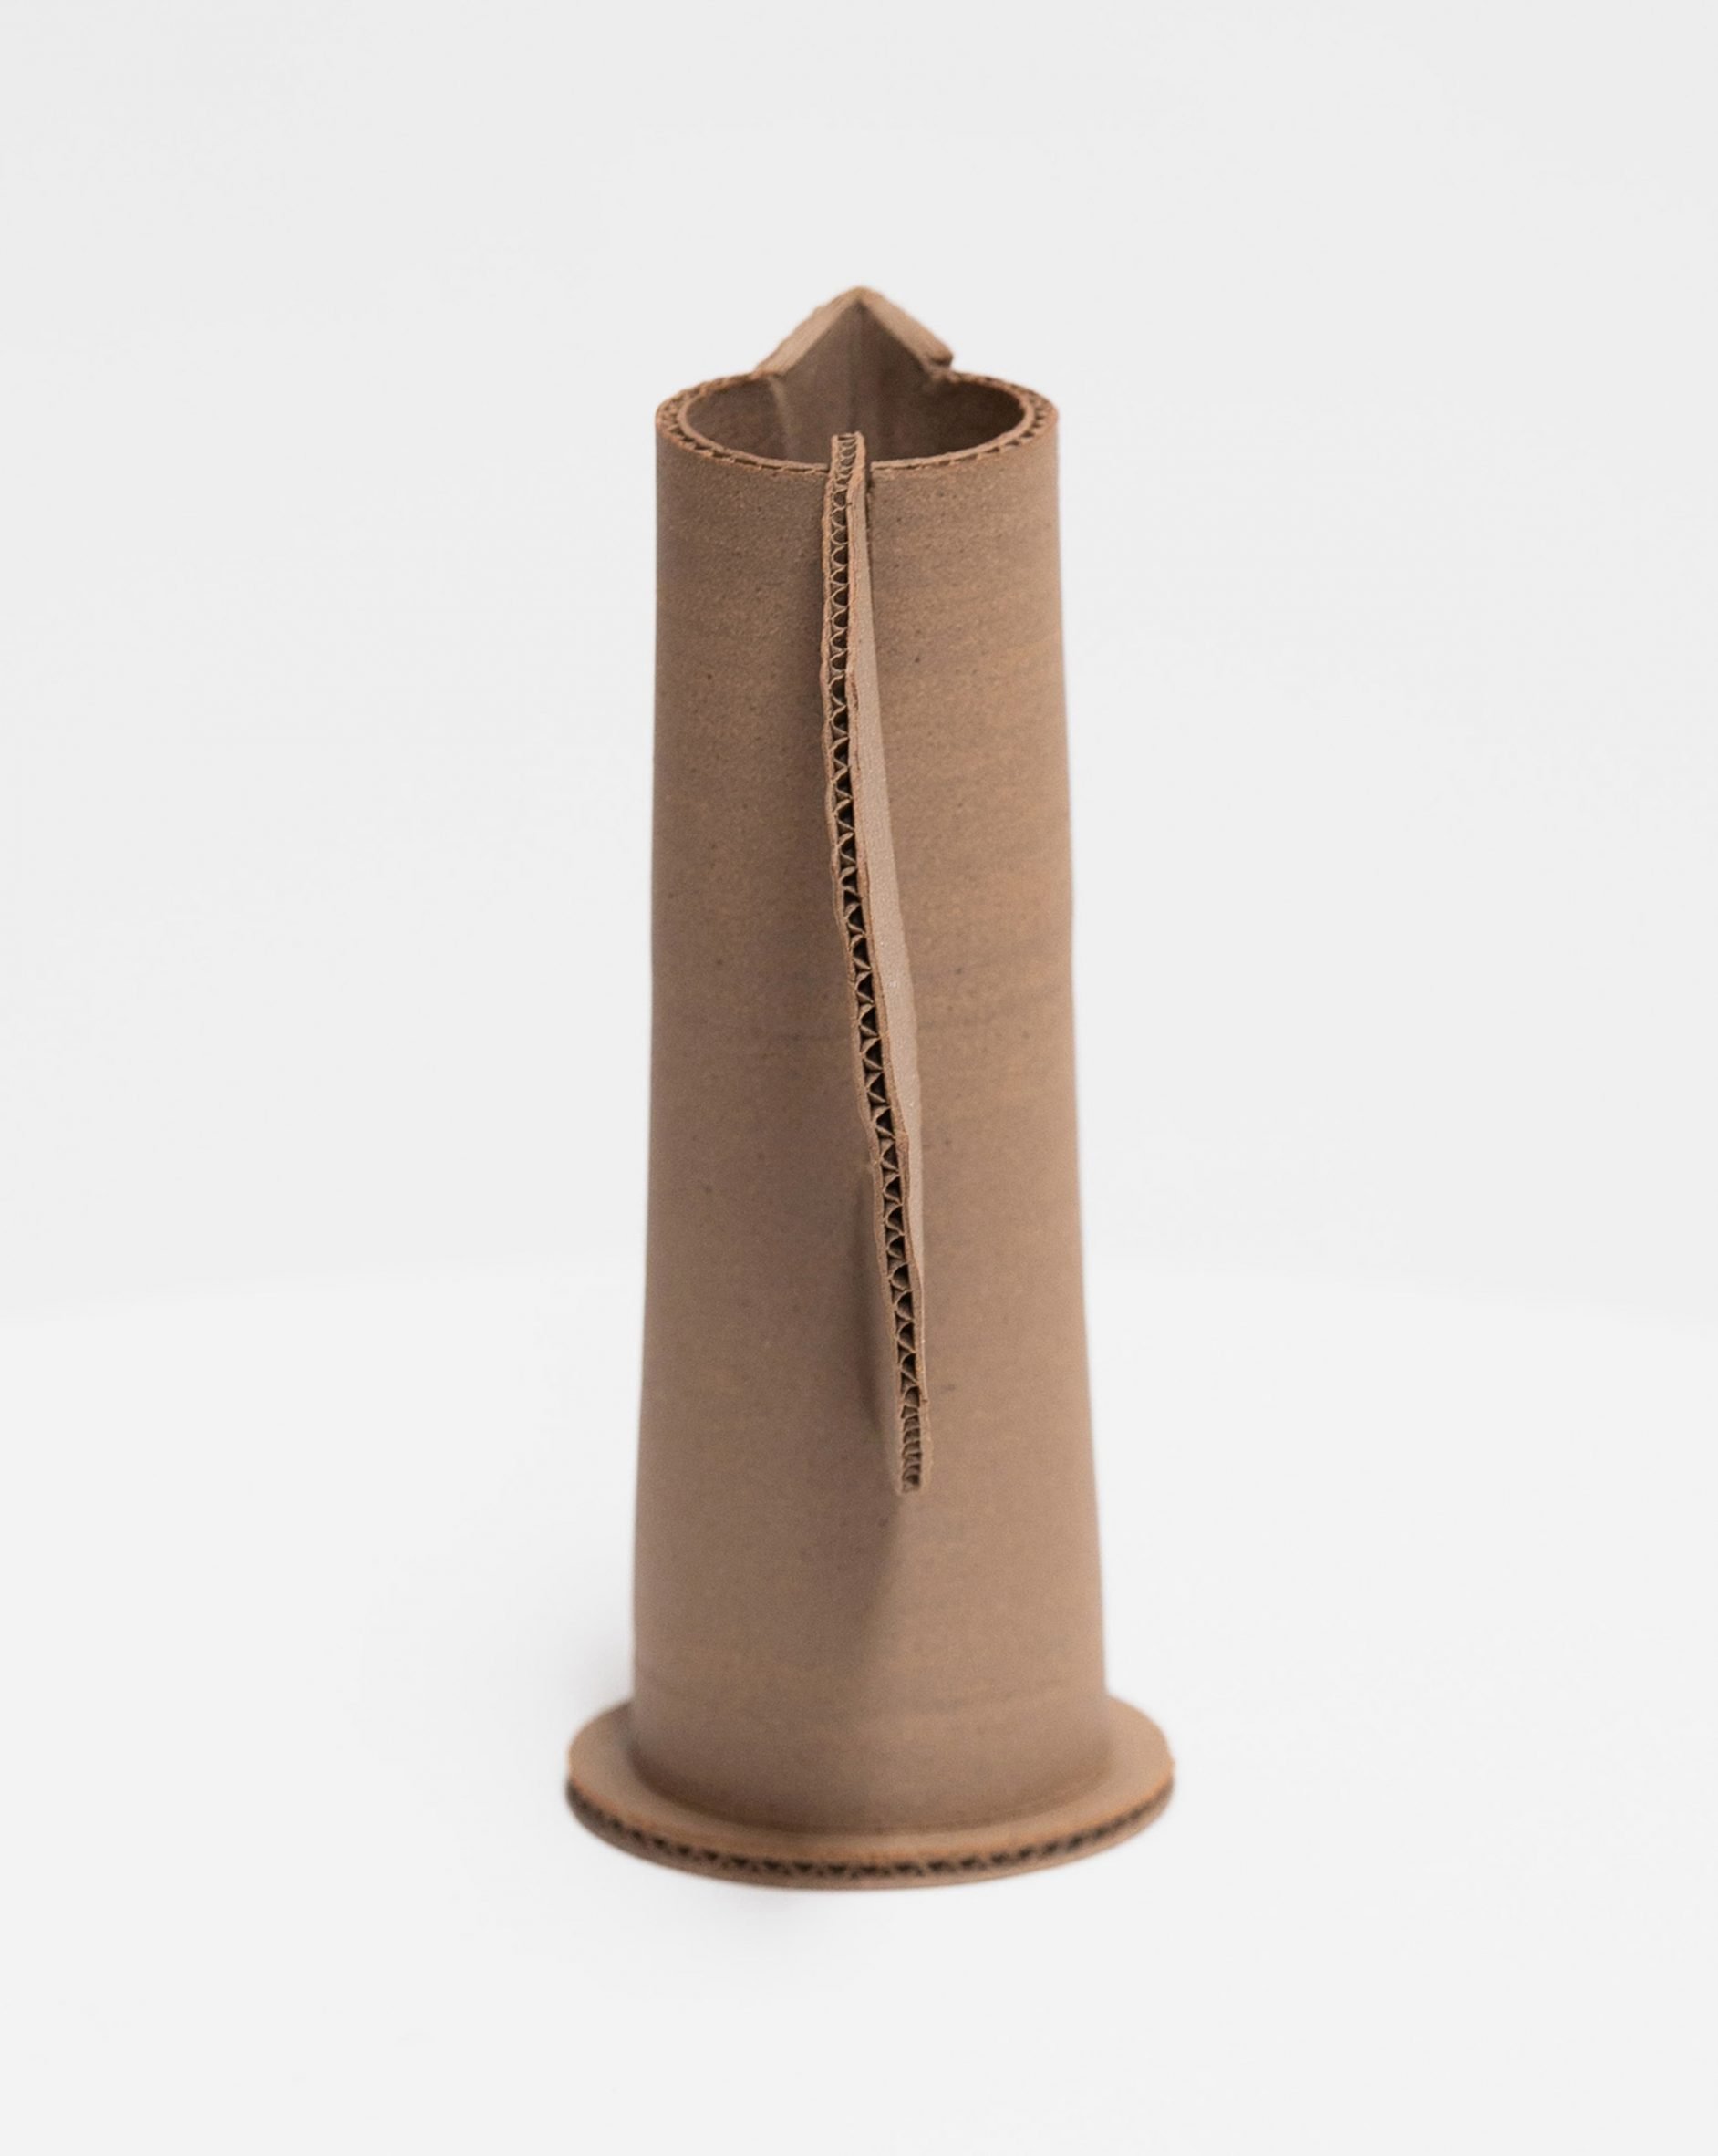 A photograph of a brown vase against a white background.